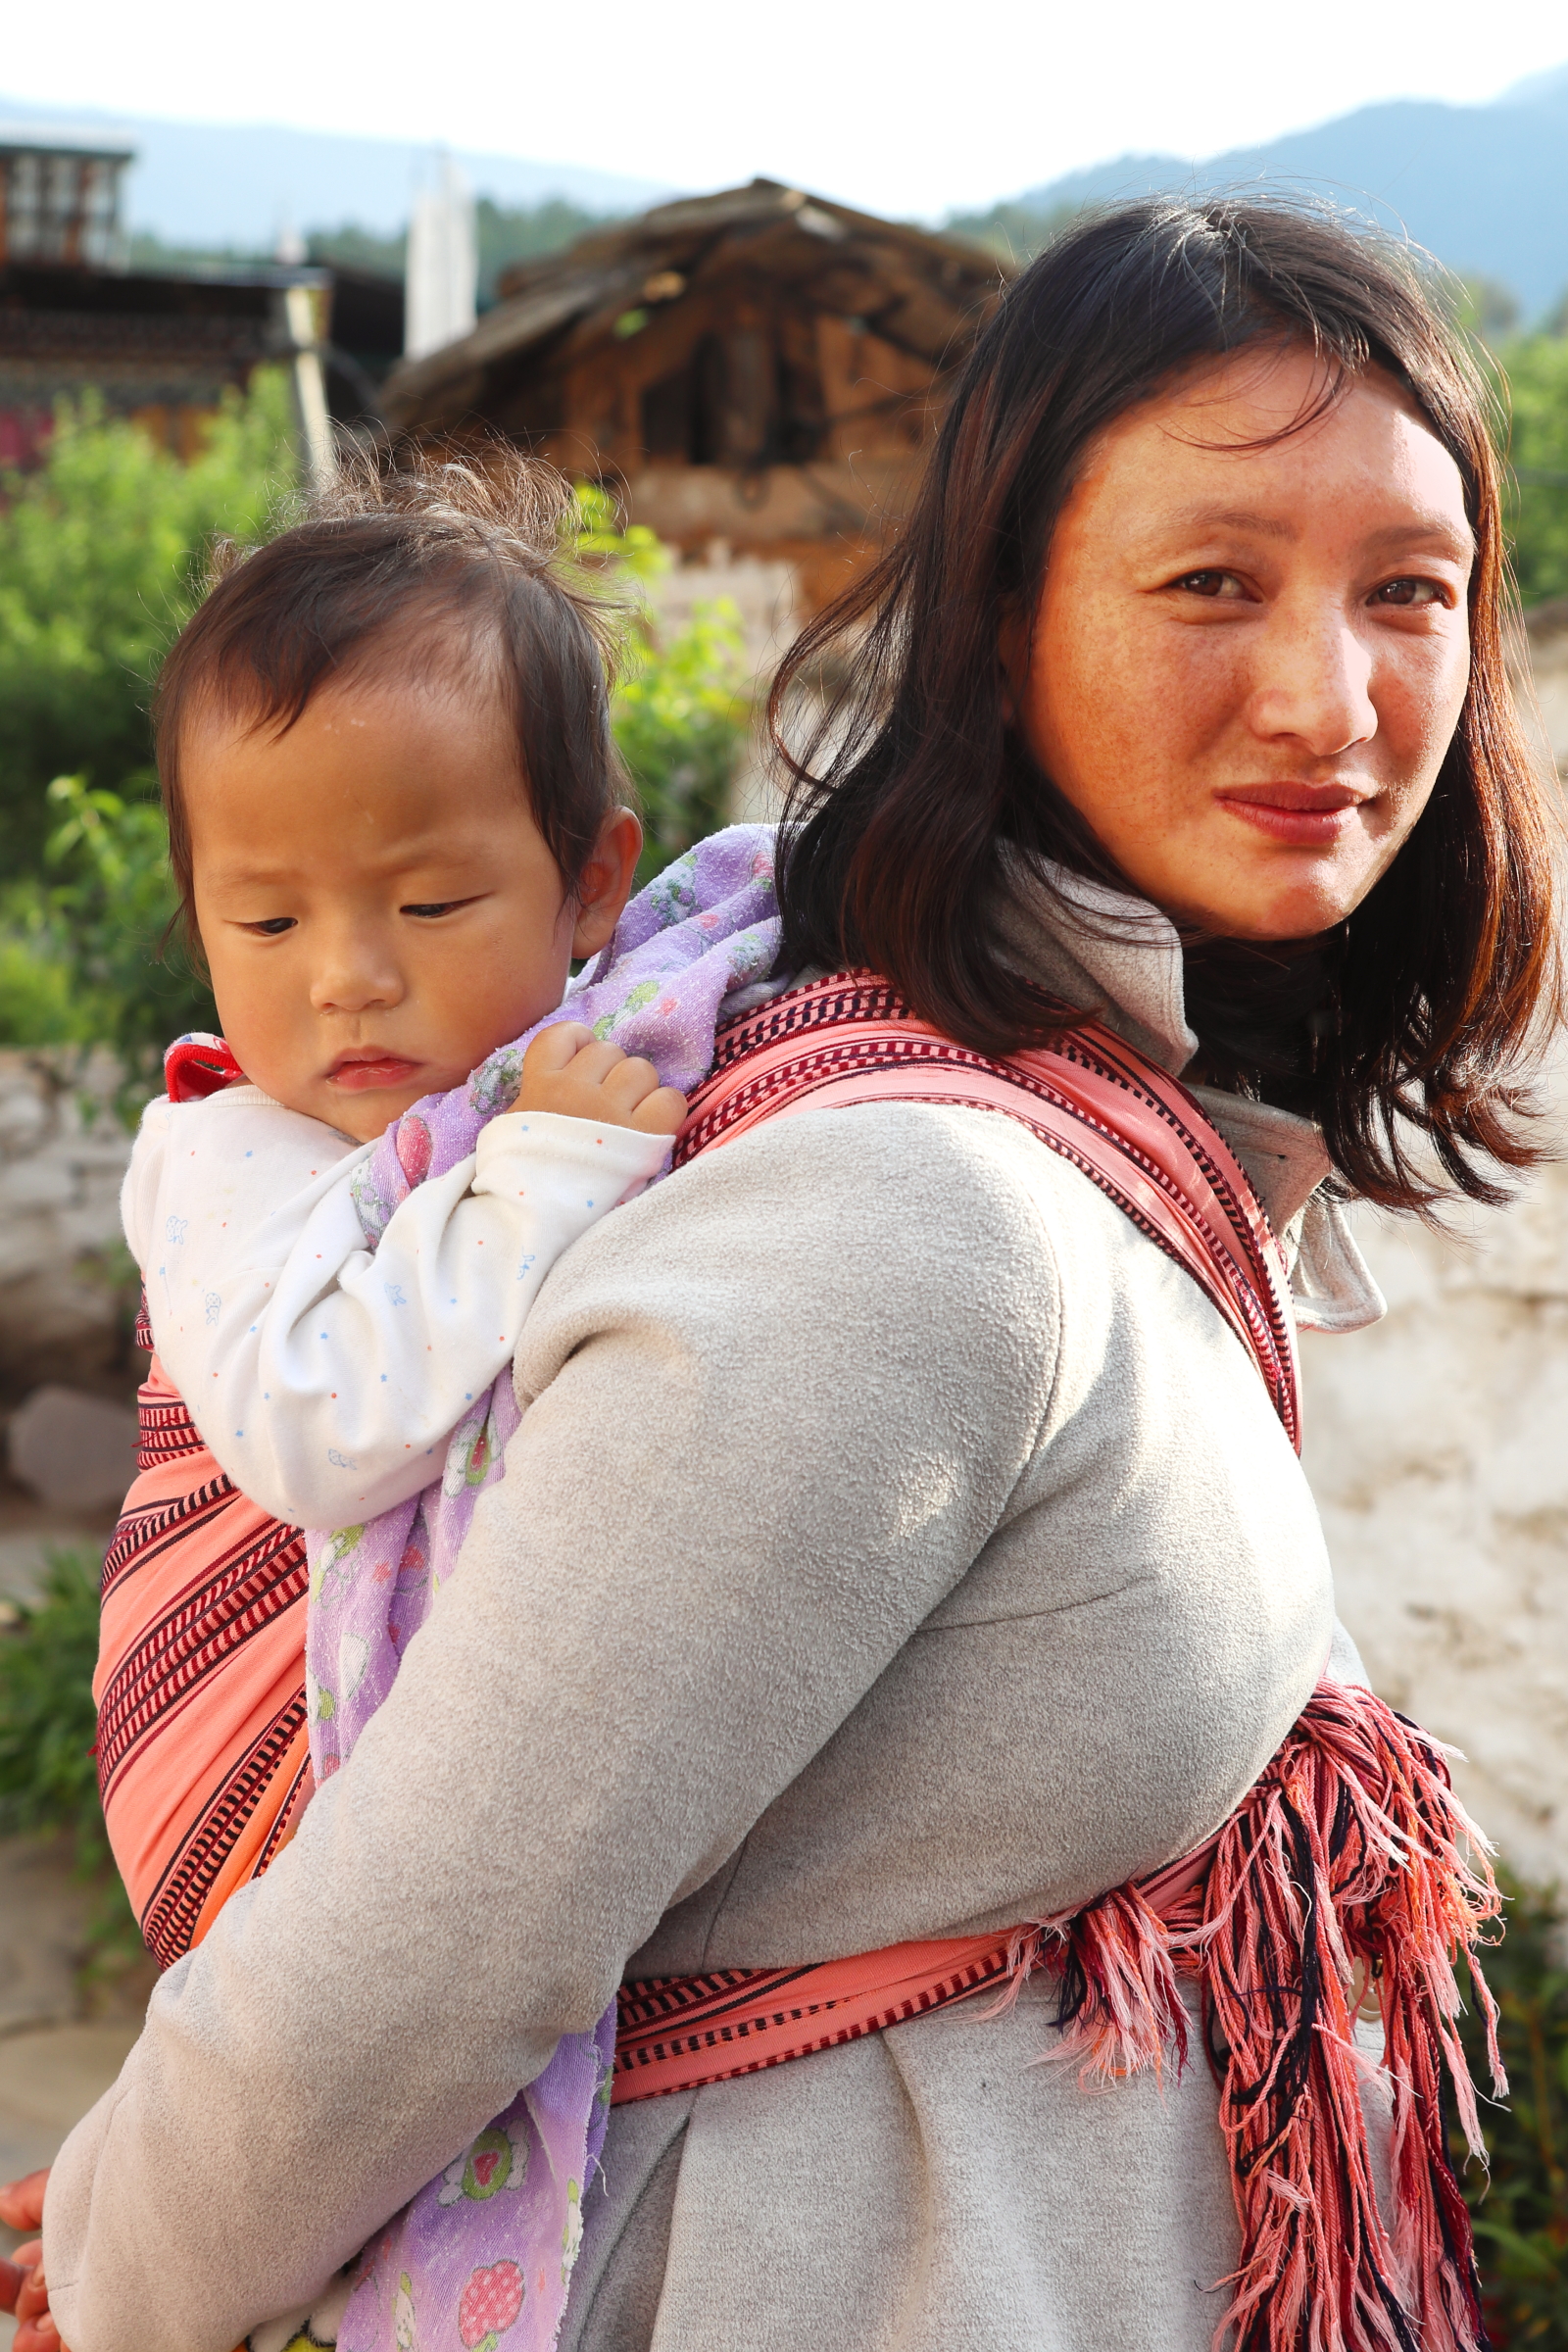 1st image from my "Portrait from Bhutan" series. I took this photo inside Kyichu Lhakhang in Paro. It is a portrait of a mother carrying his son in her back.